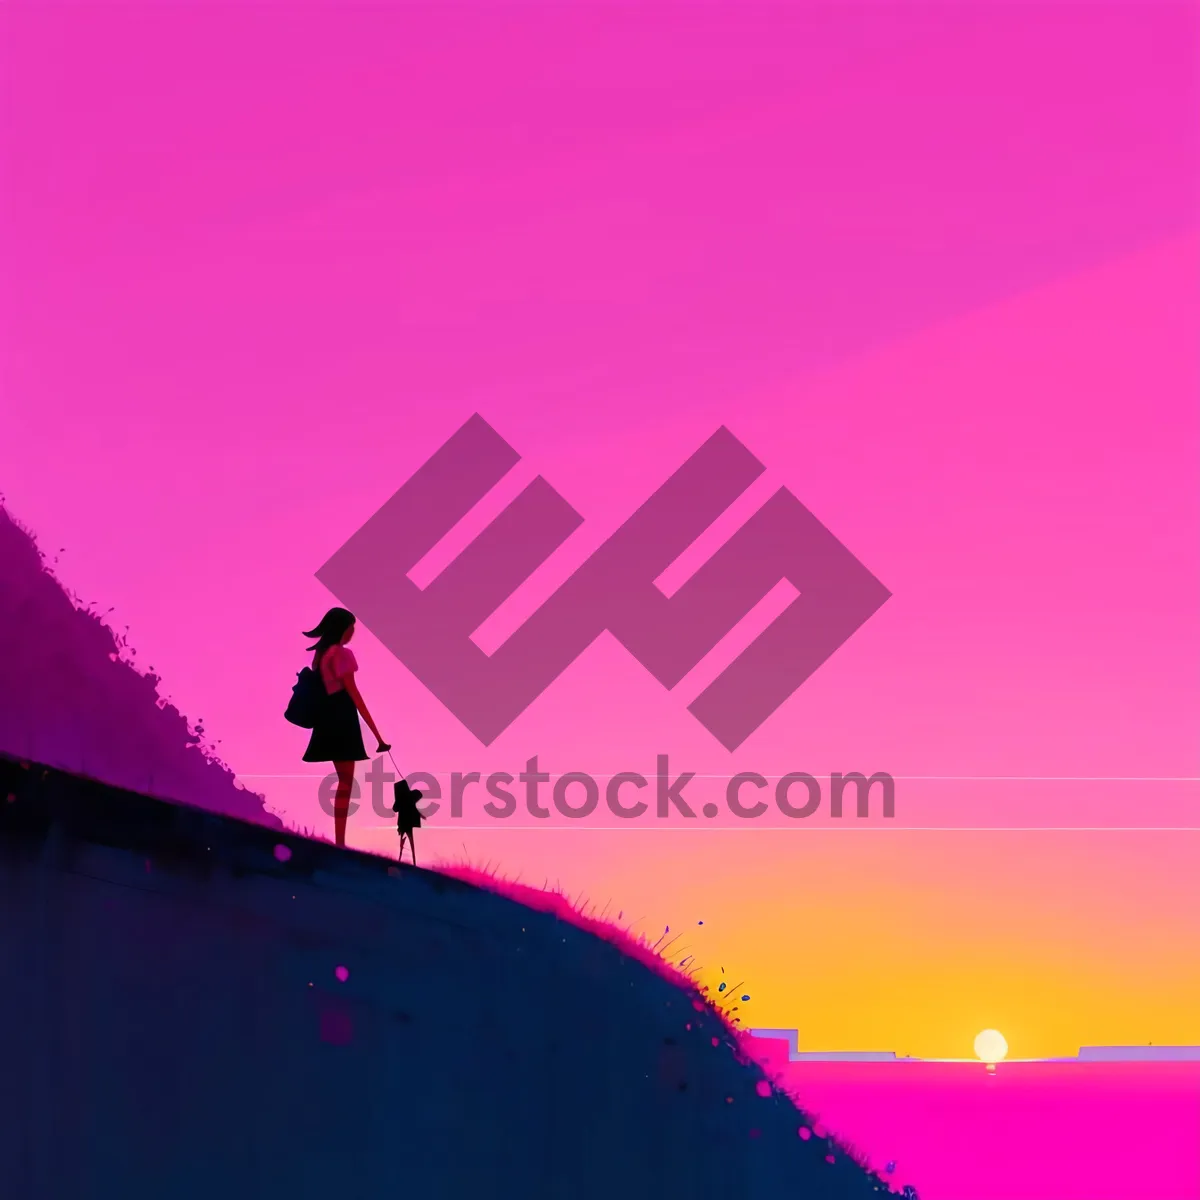 Picture of Sunset Silhouette on Mountain Slope